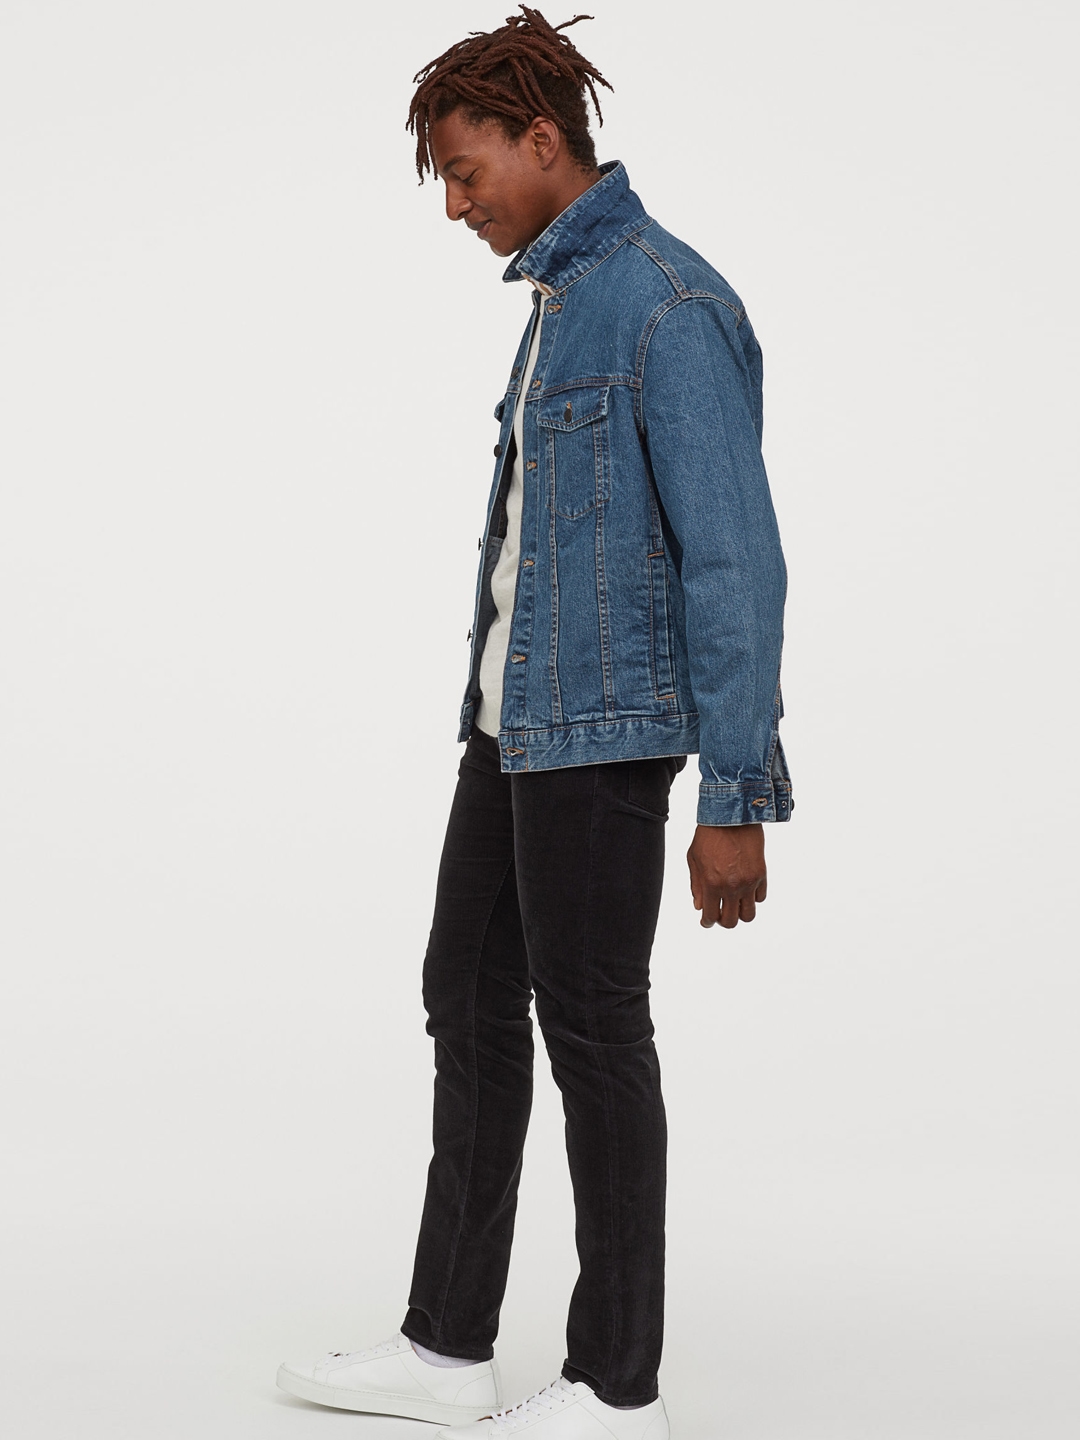 Top 155+ h and m denim jacket latest